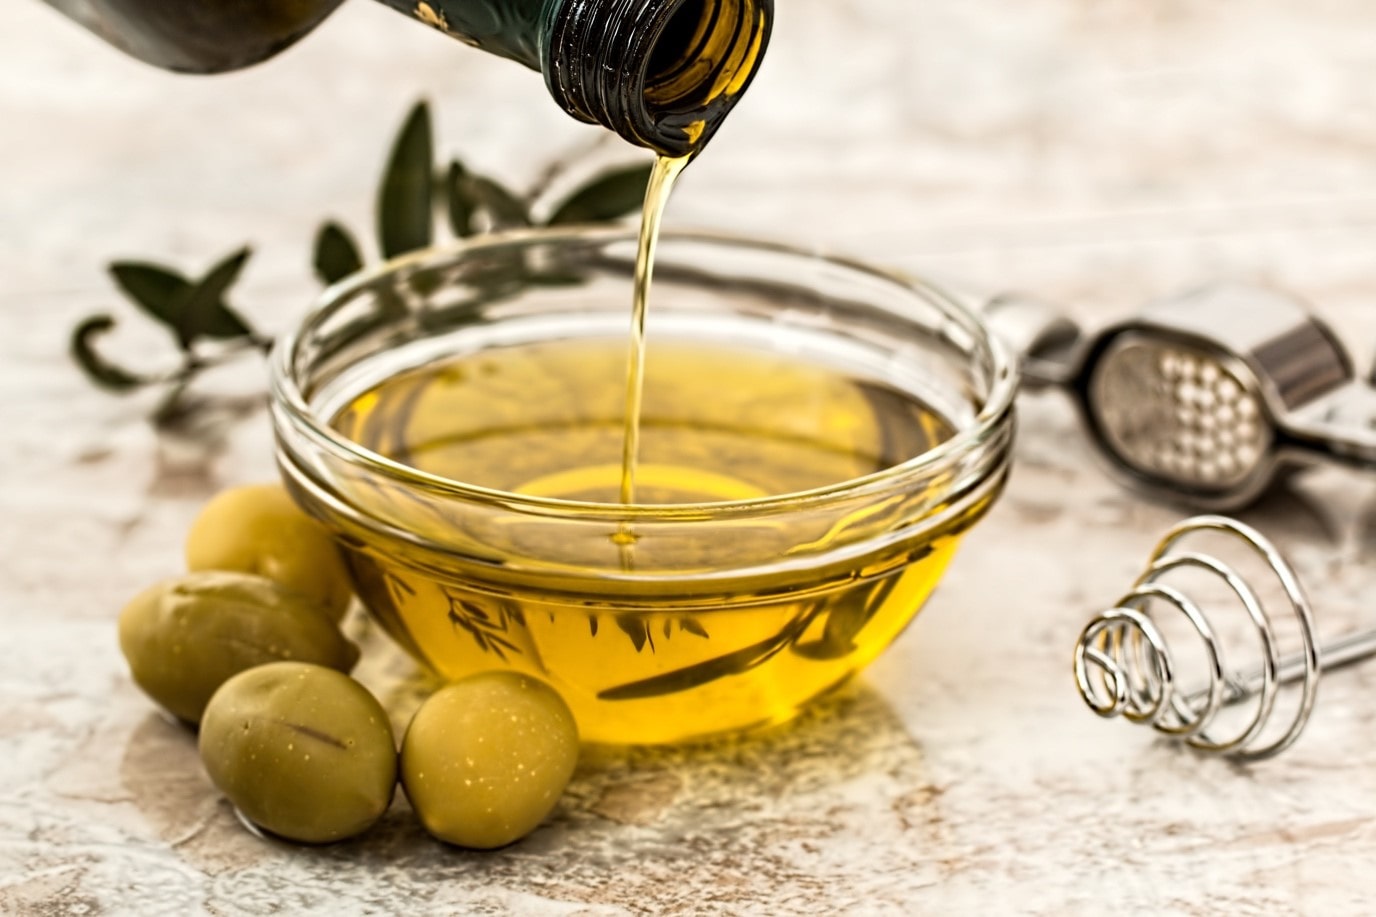 Olive oil as Essential Oil Carrier Oil